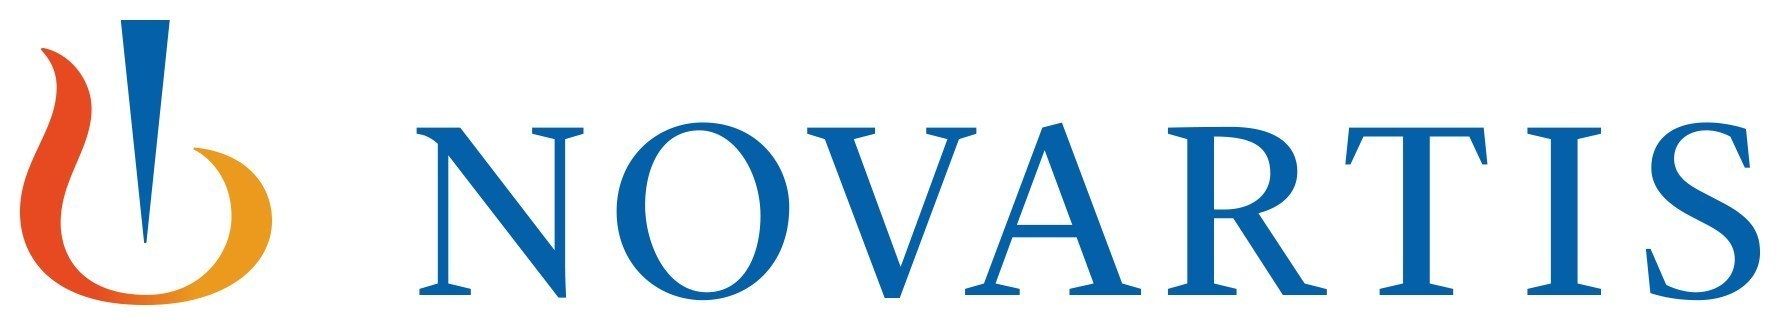 Novartis In Canada Driving Digital Healthcare Solutions With The Inauguration Of A Biome Innovation Hub